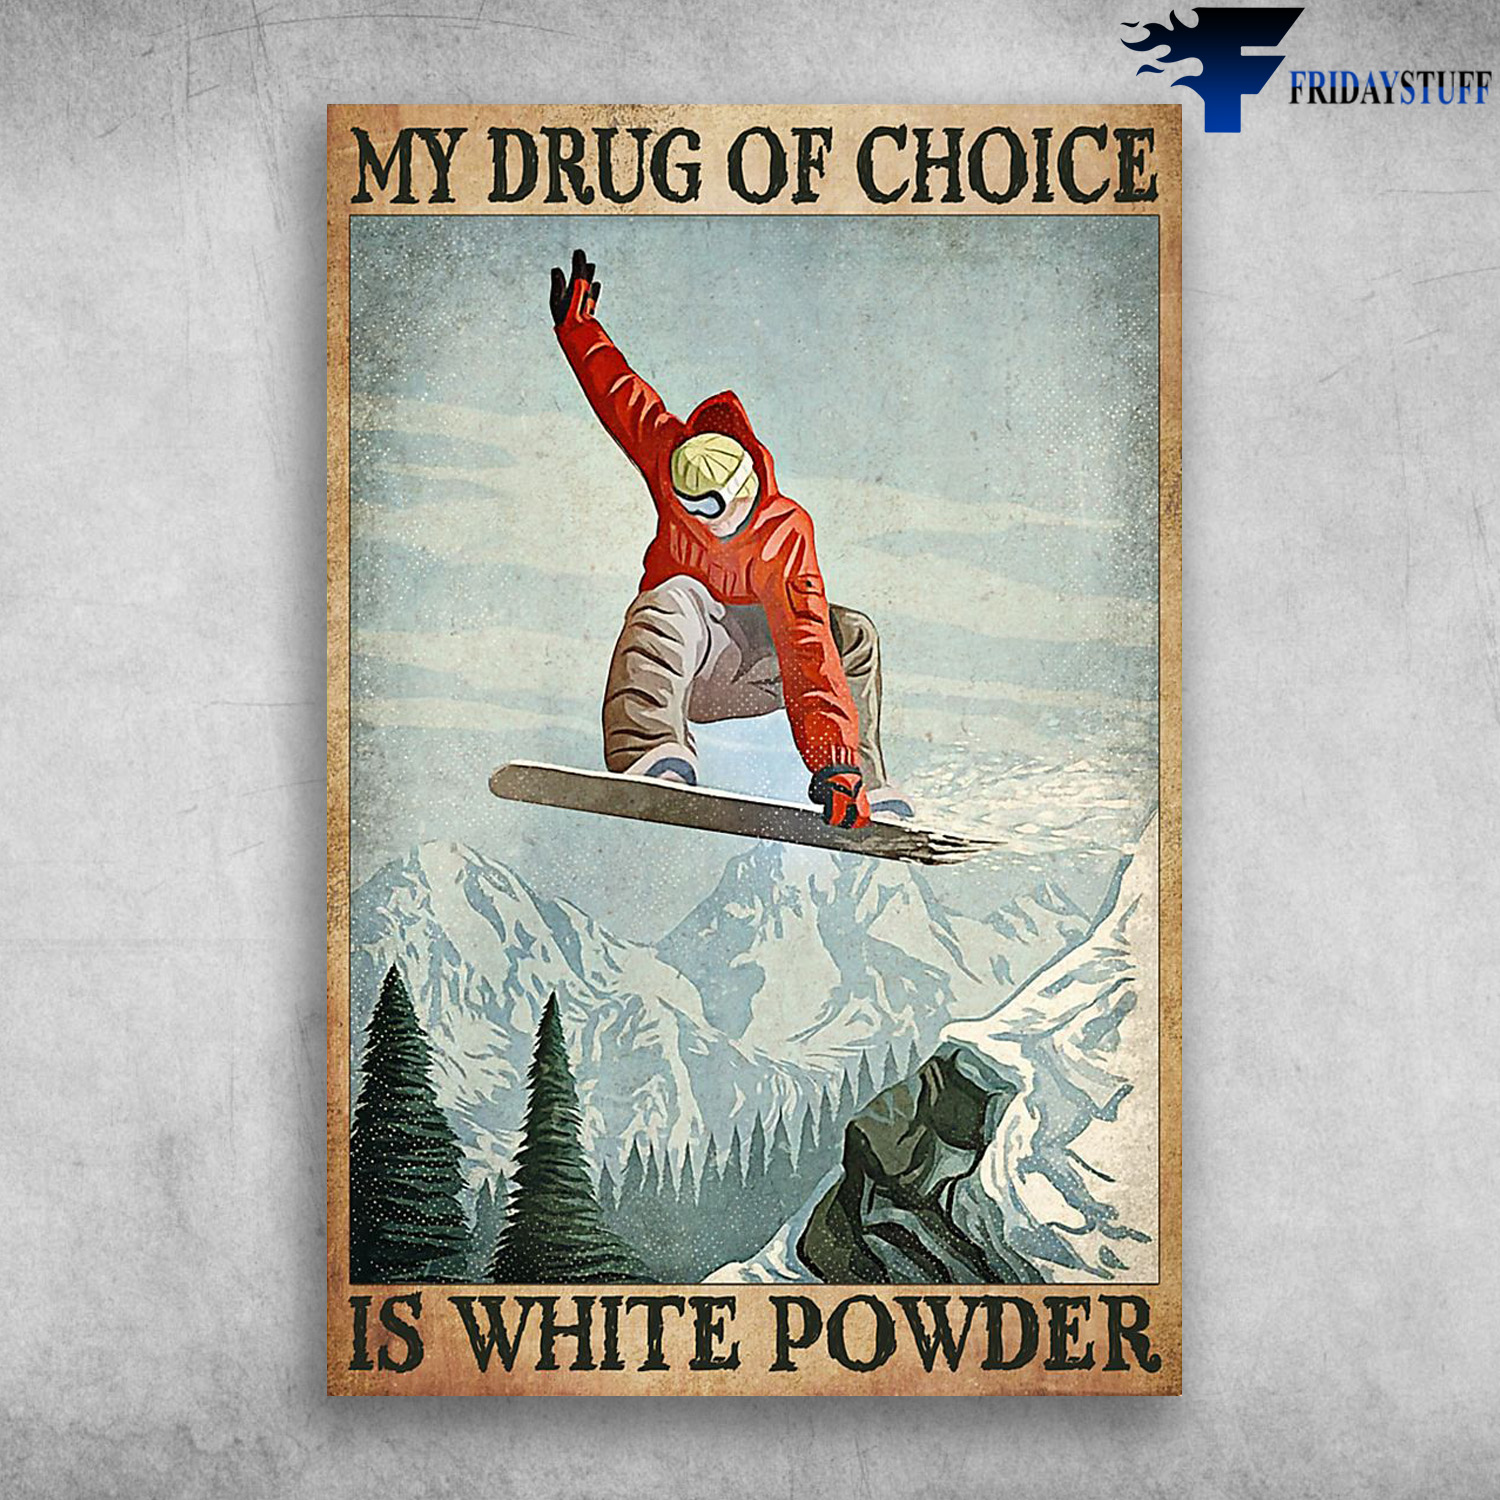 Man In Red Snowboarding - My Drug Of Choice Is White Powder